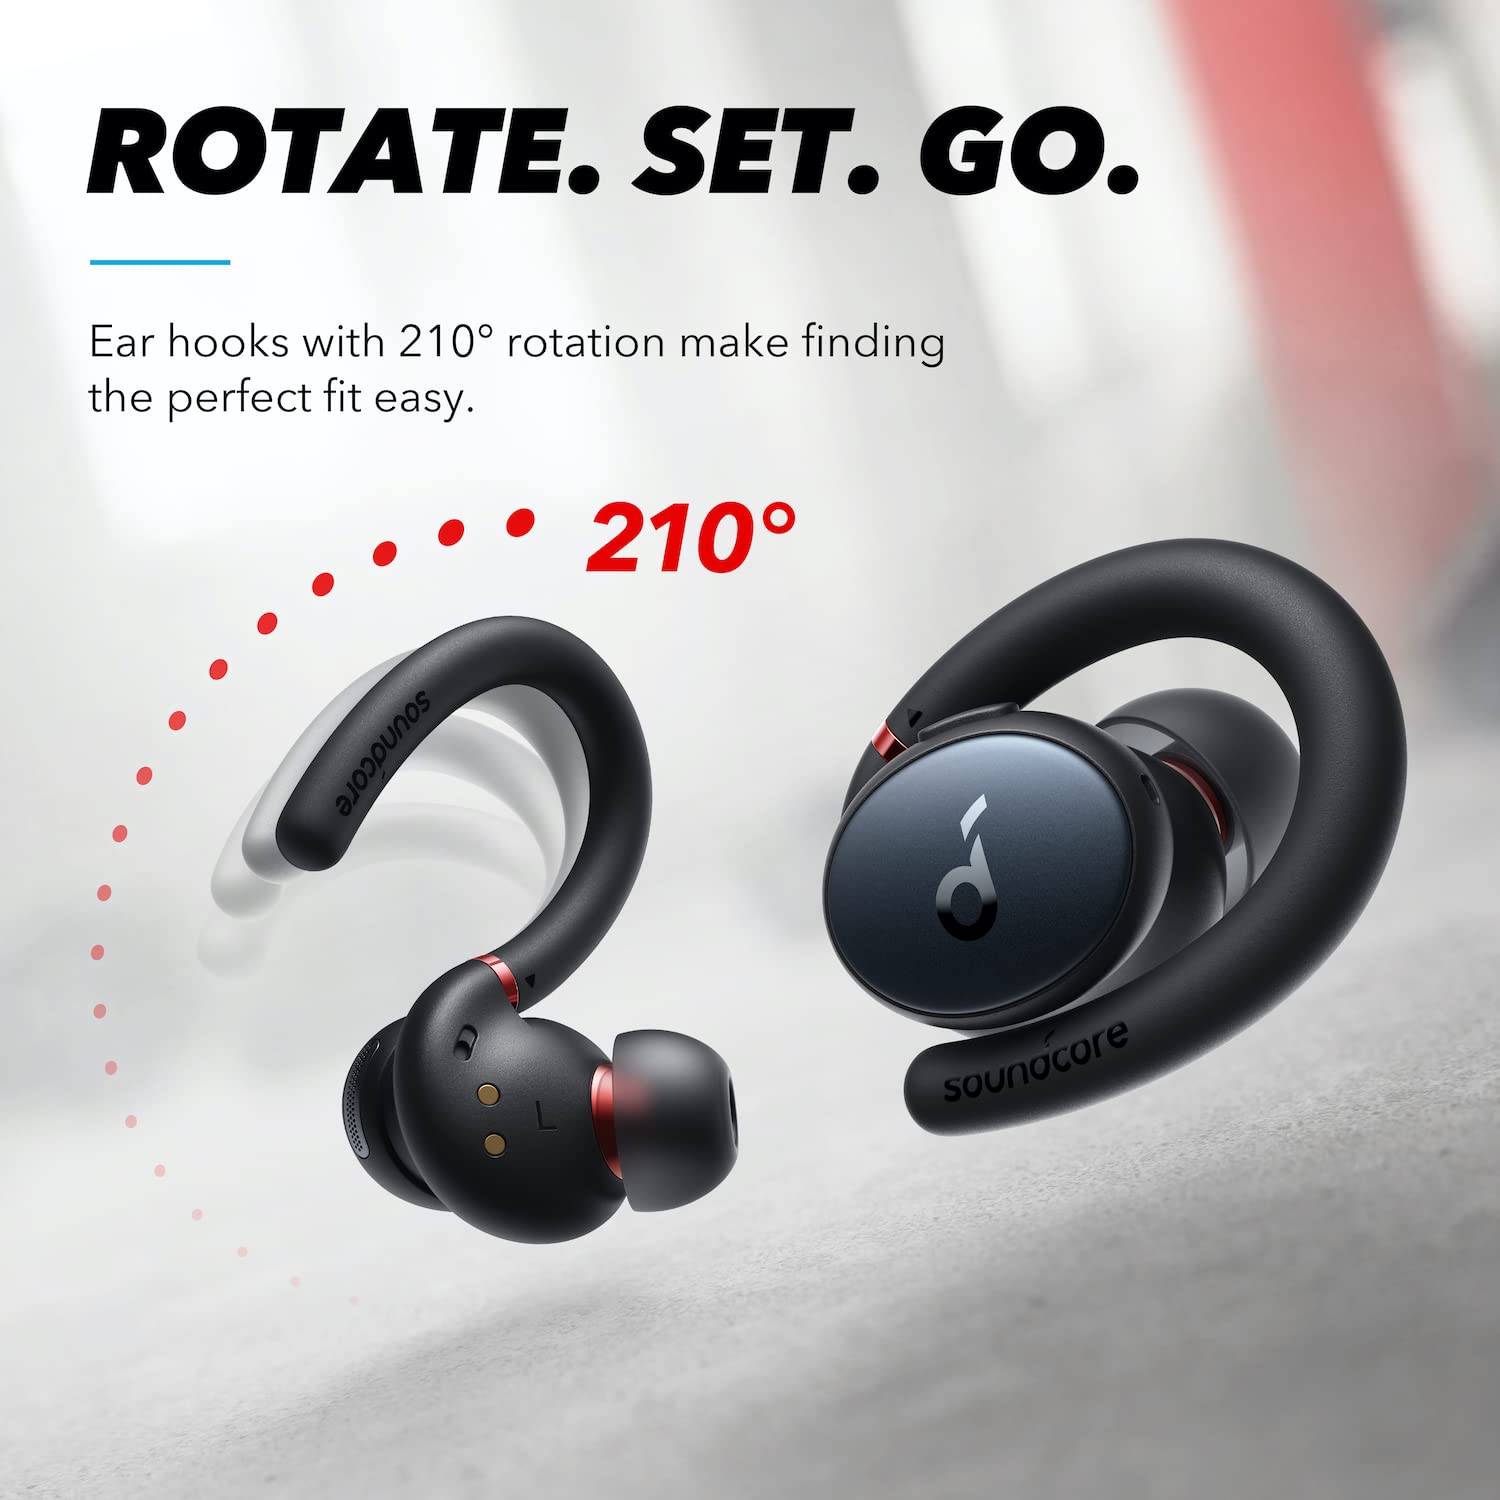 soundcore by Anker Sport X10 True Wireless Bluetooth Sport Earbuds, Rotatable Over-Ear Hooks for Ultimate Comfort and Secure Fit, Deep Bass, IPX7 Waterproof, Sweatproof, Fast Charge, App, Gym, Running